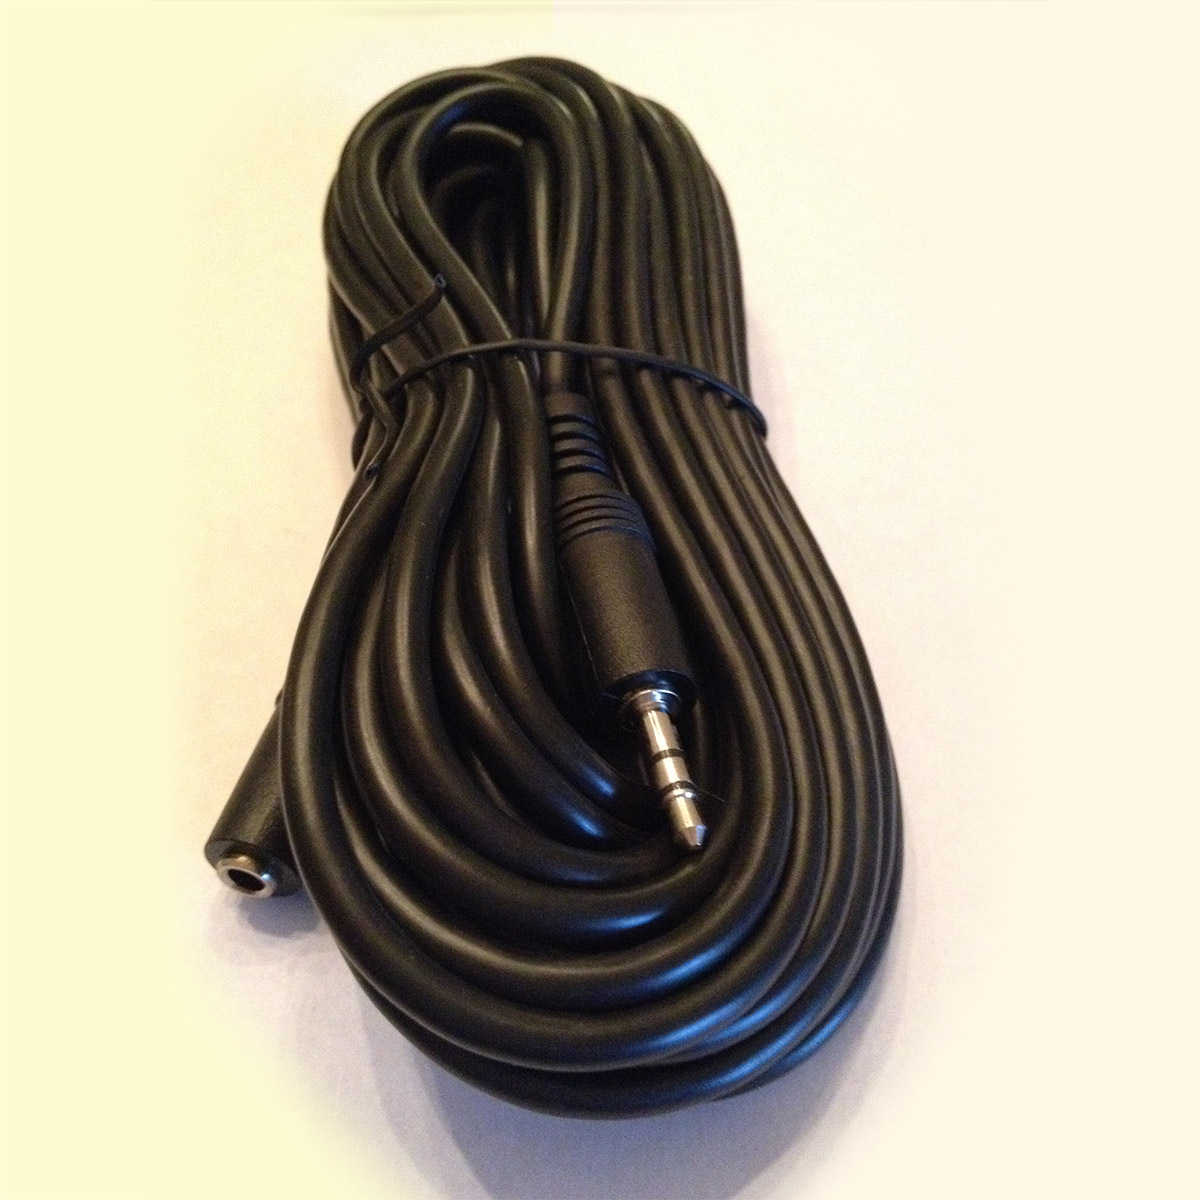 25 Foot Audio Extension Cable